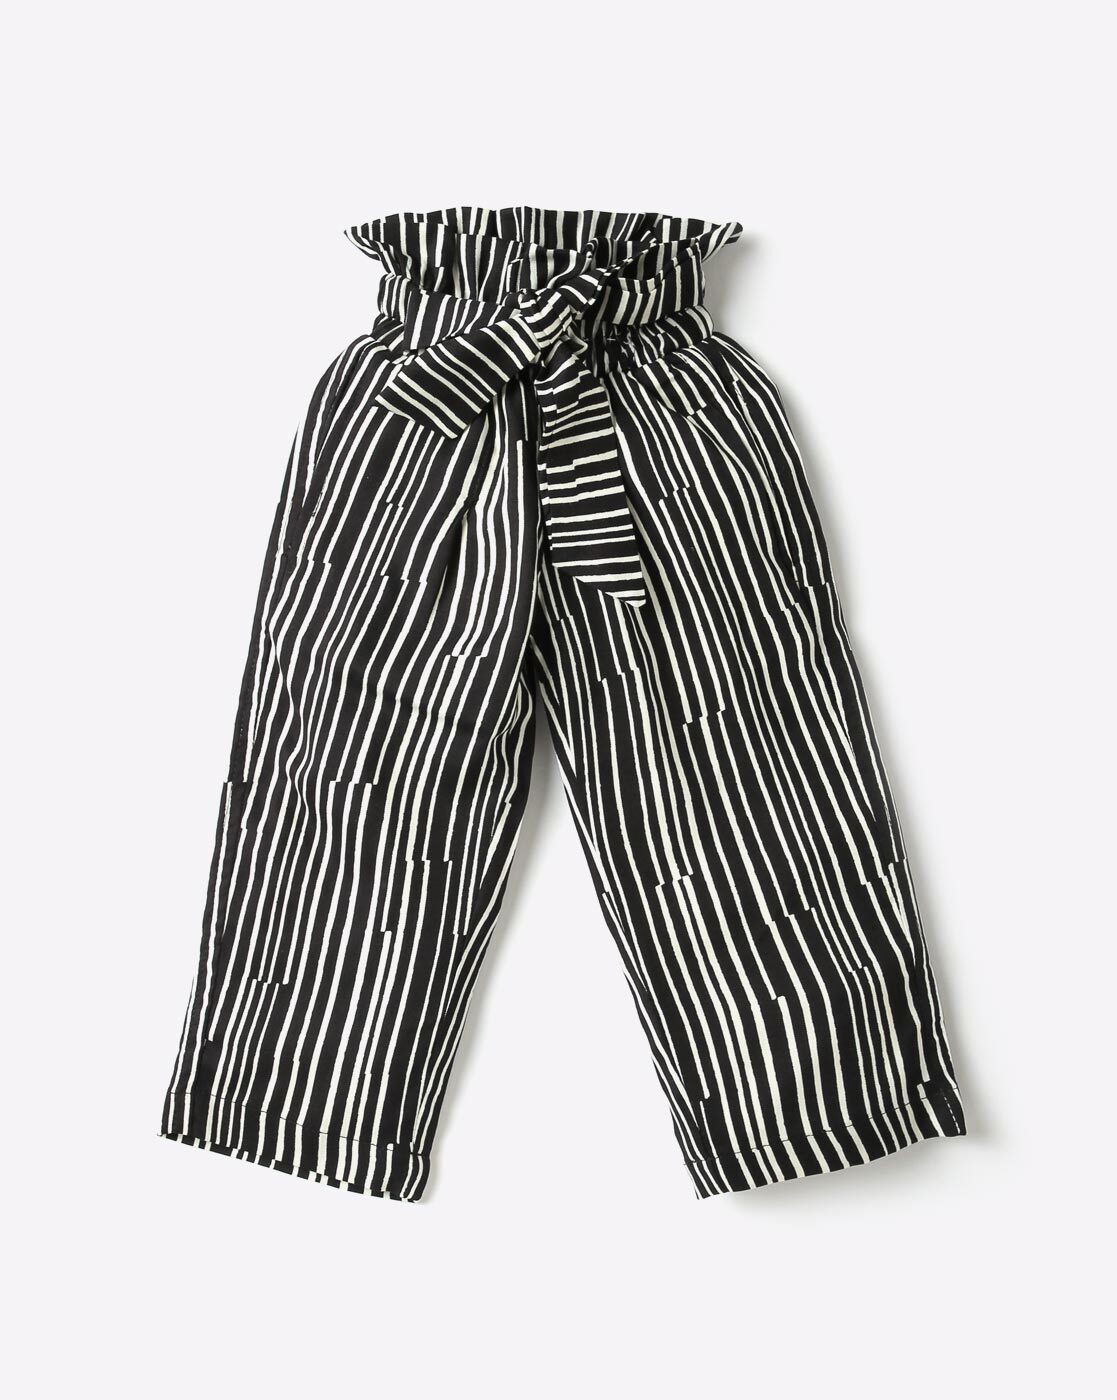 hollister black and white striped pants